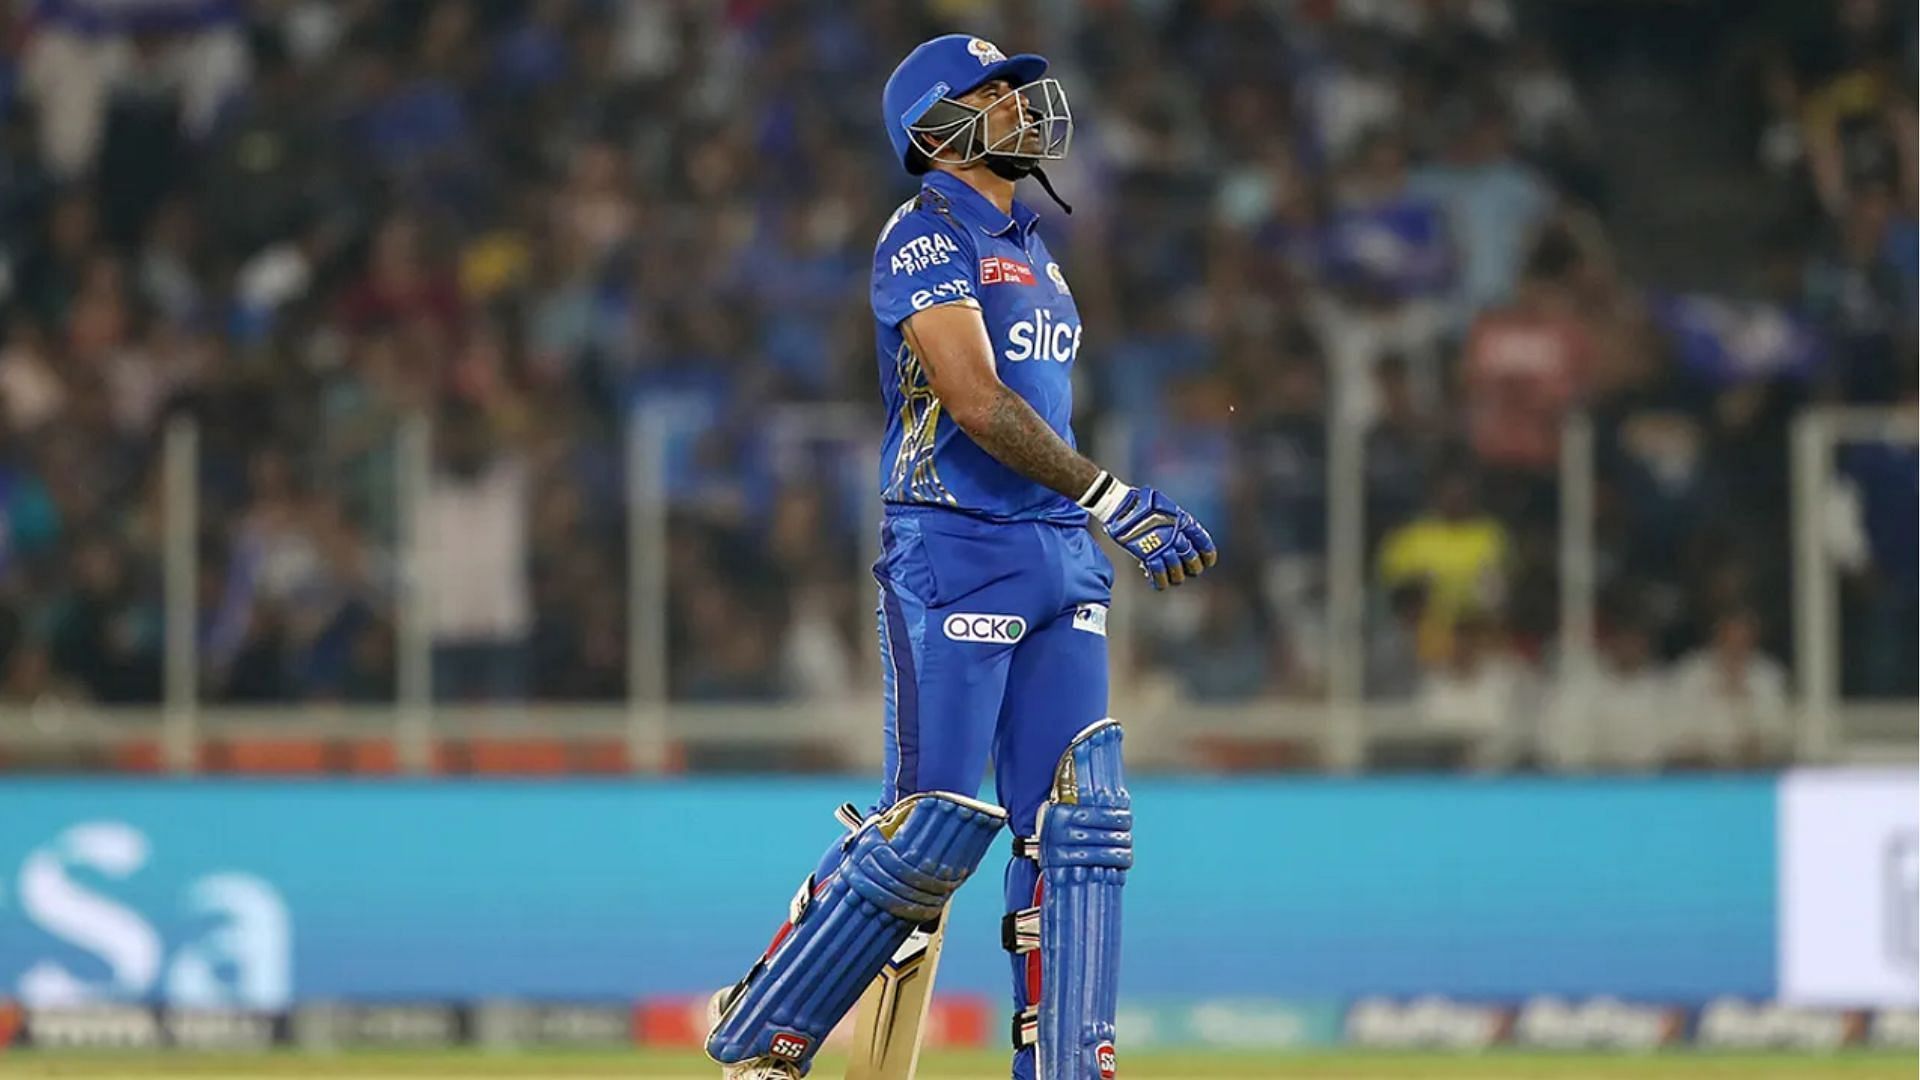 Suryakumar Yadav had a sensational IPL 2023 with the bat and is a major loss for MI if absent